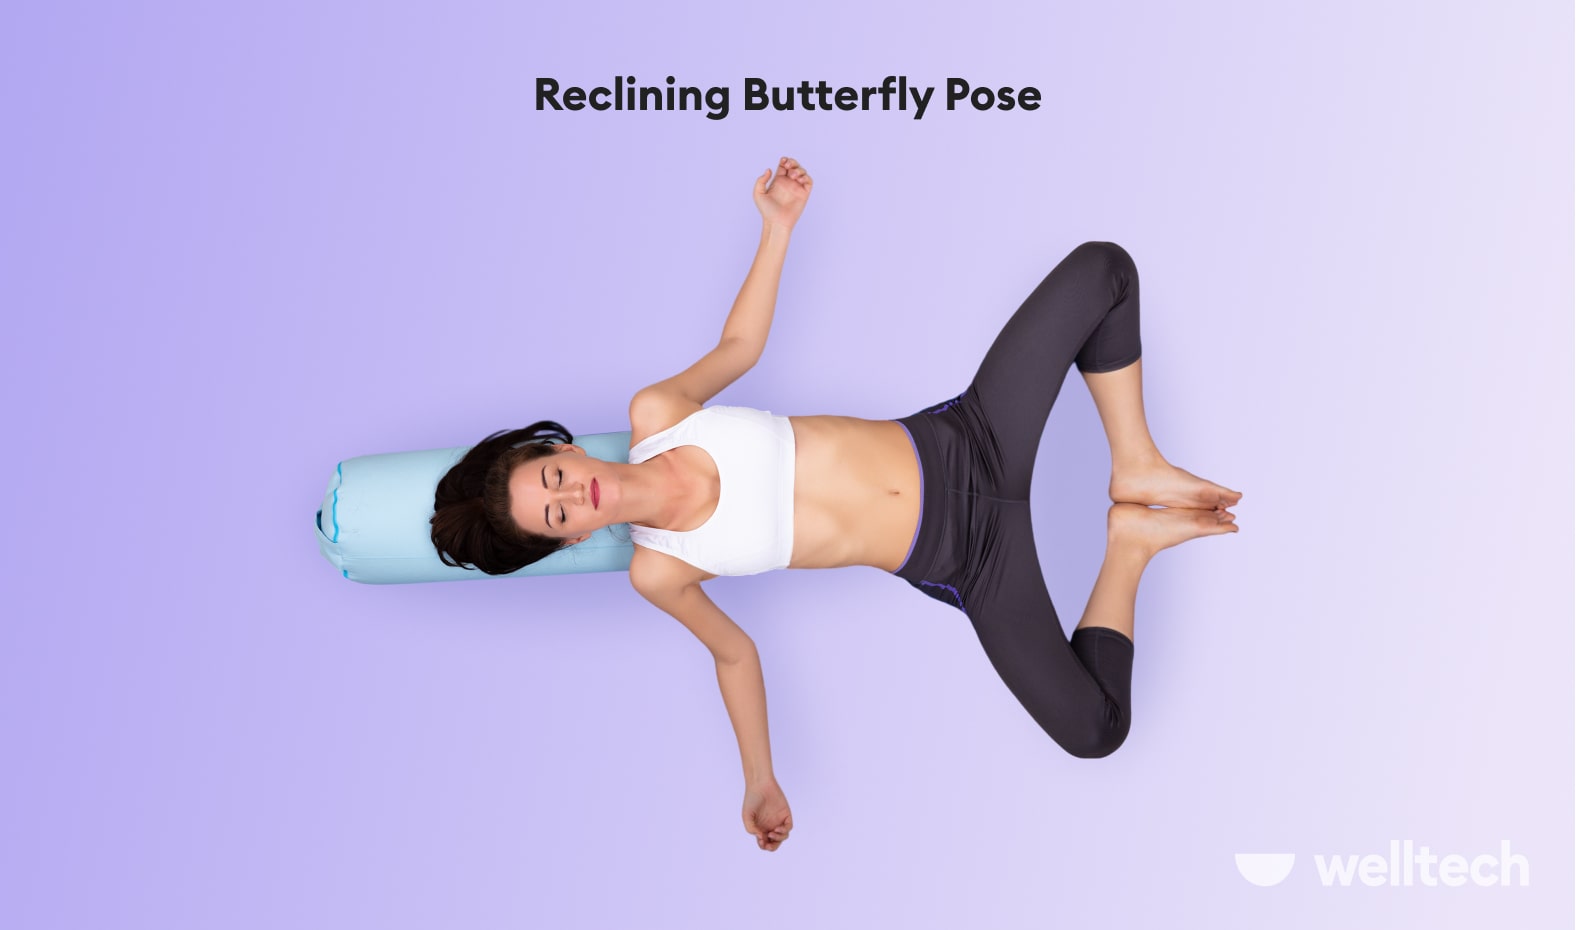 5 yoga poses to practice with a bolster